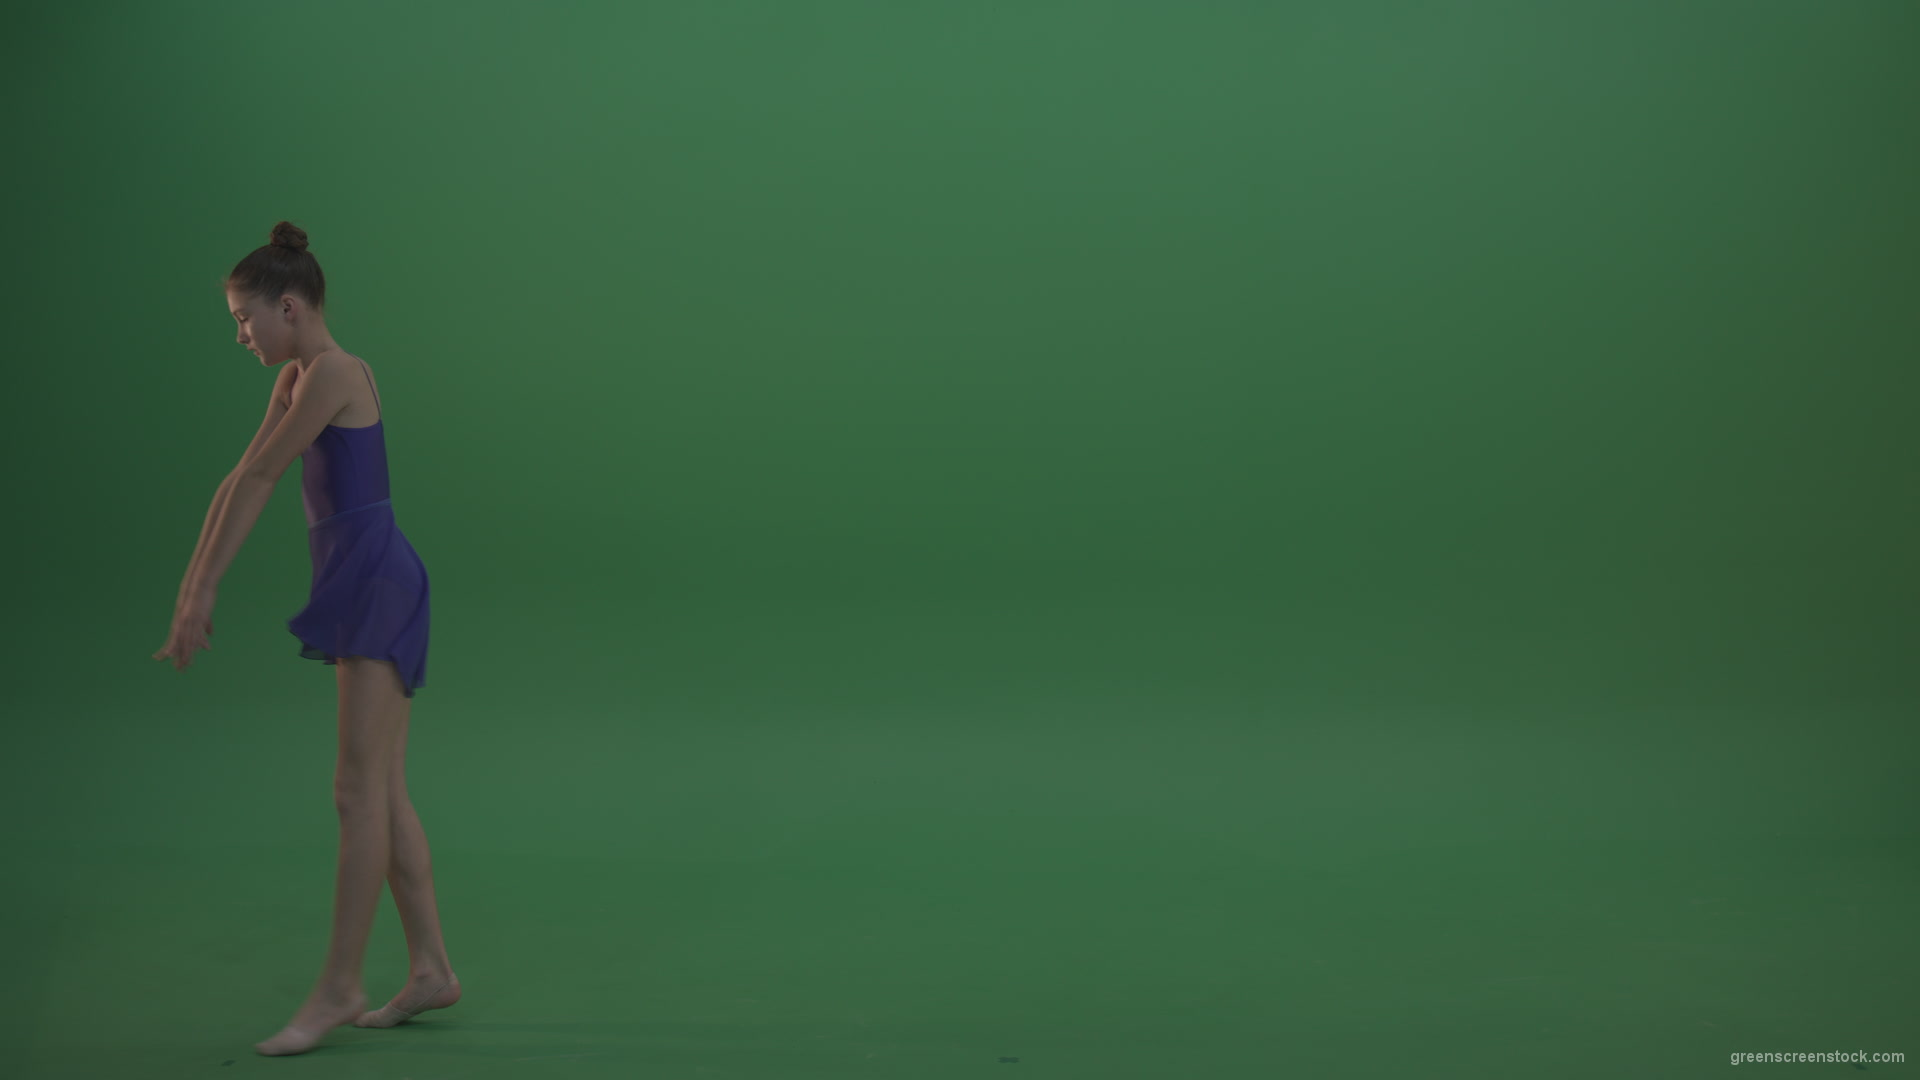 Young_Gymnast_Showing_Marvelous_Technical_Dance_Swan_Ballet_Moves_Technical_Performance_Of_Rhythmic_Artistic_Gymnastics_On_Green_Screen_Wall_Background_007 Green Screen Stock